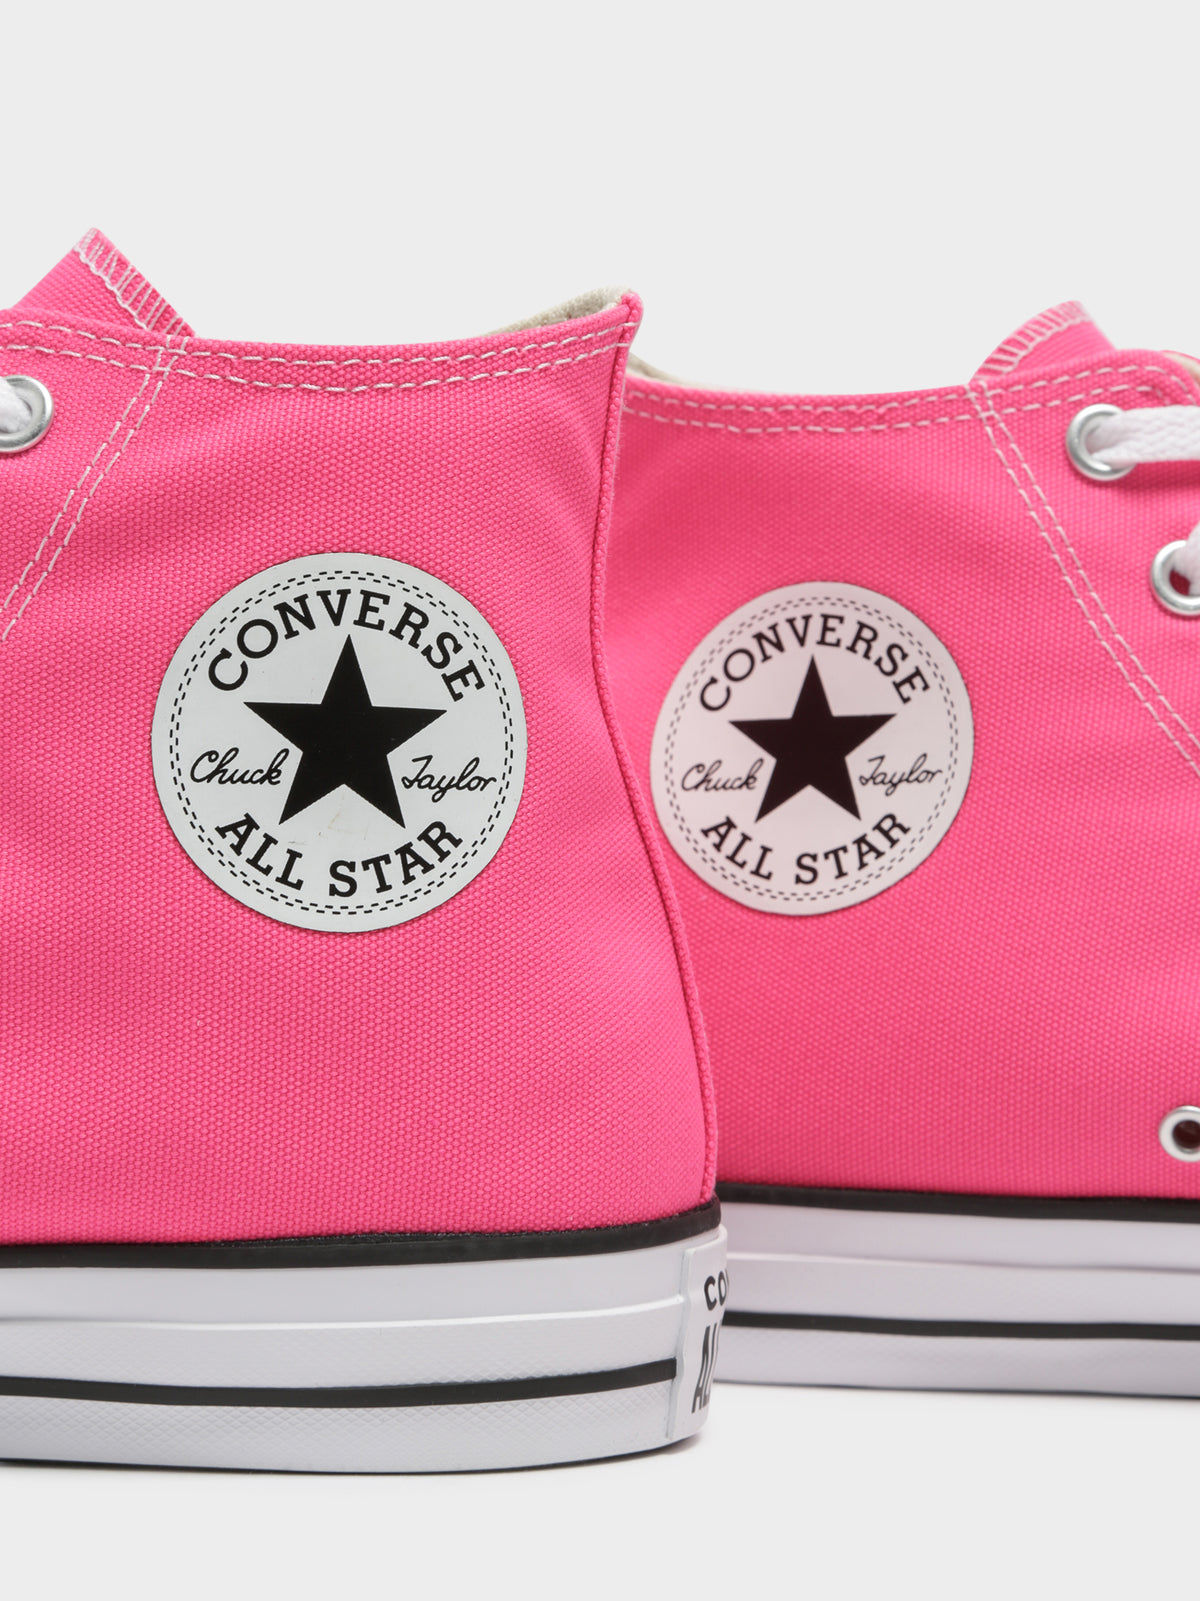 Unisex Chuck Taylor All Star High Sneakers in Pink